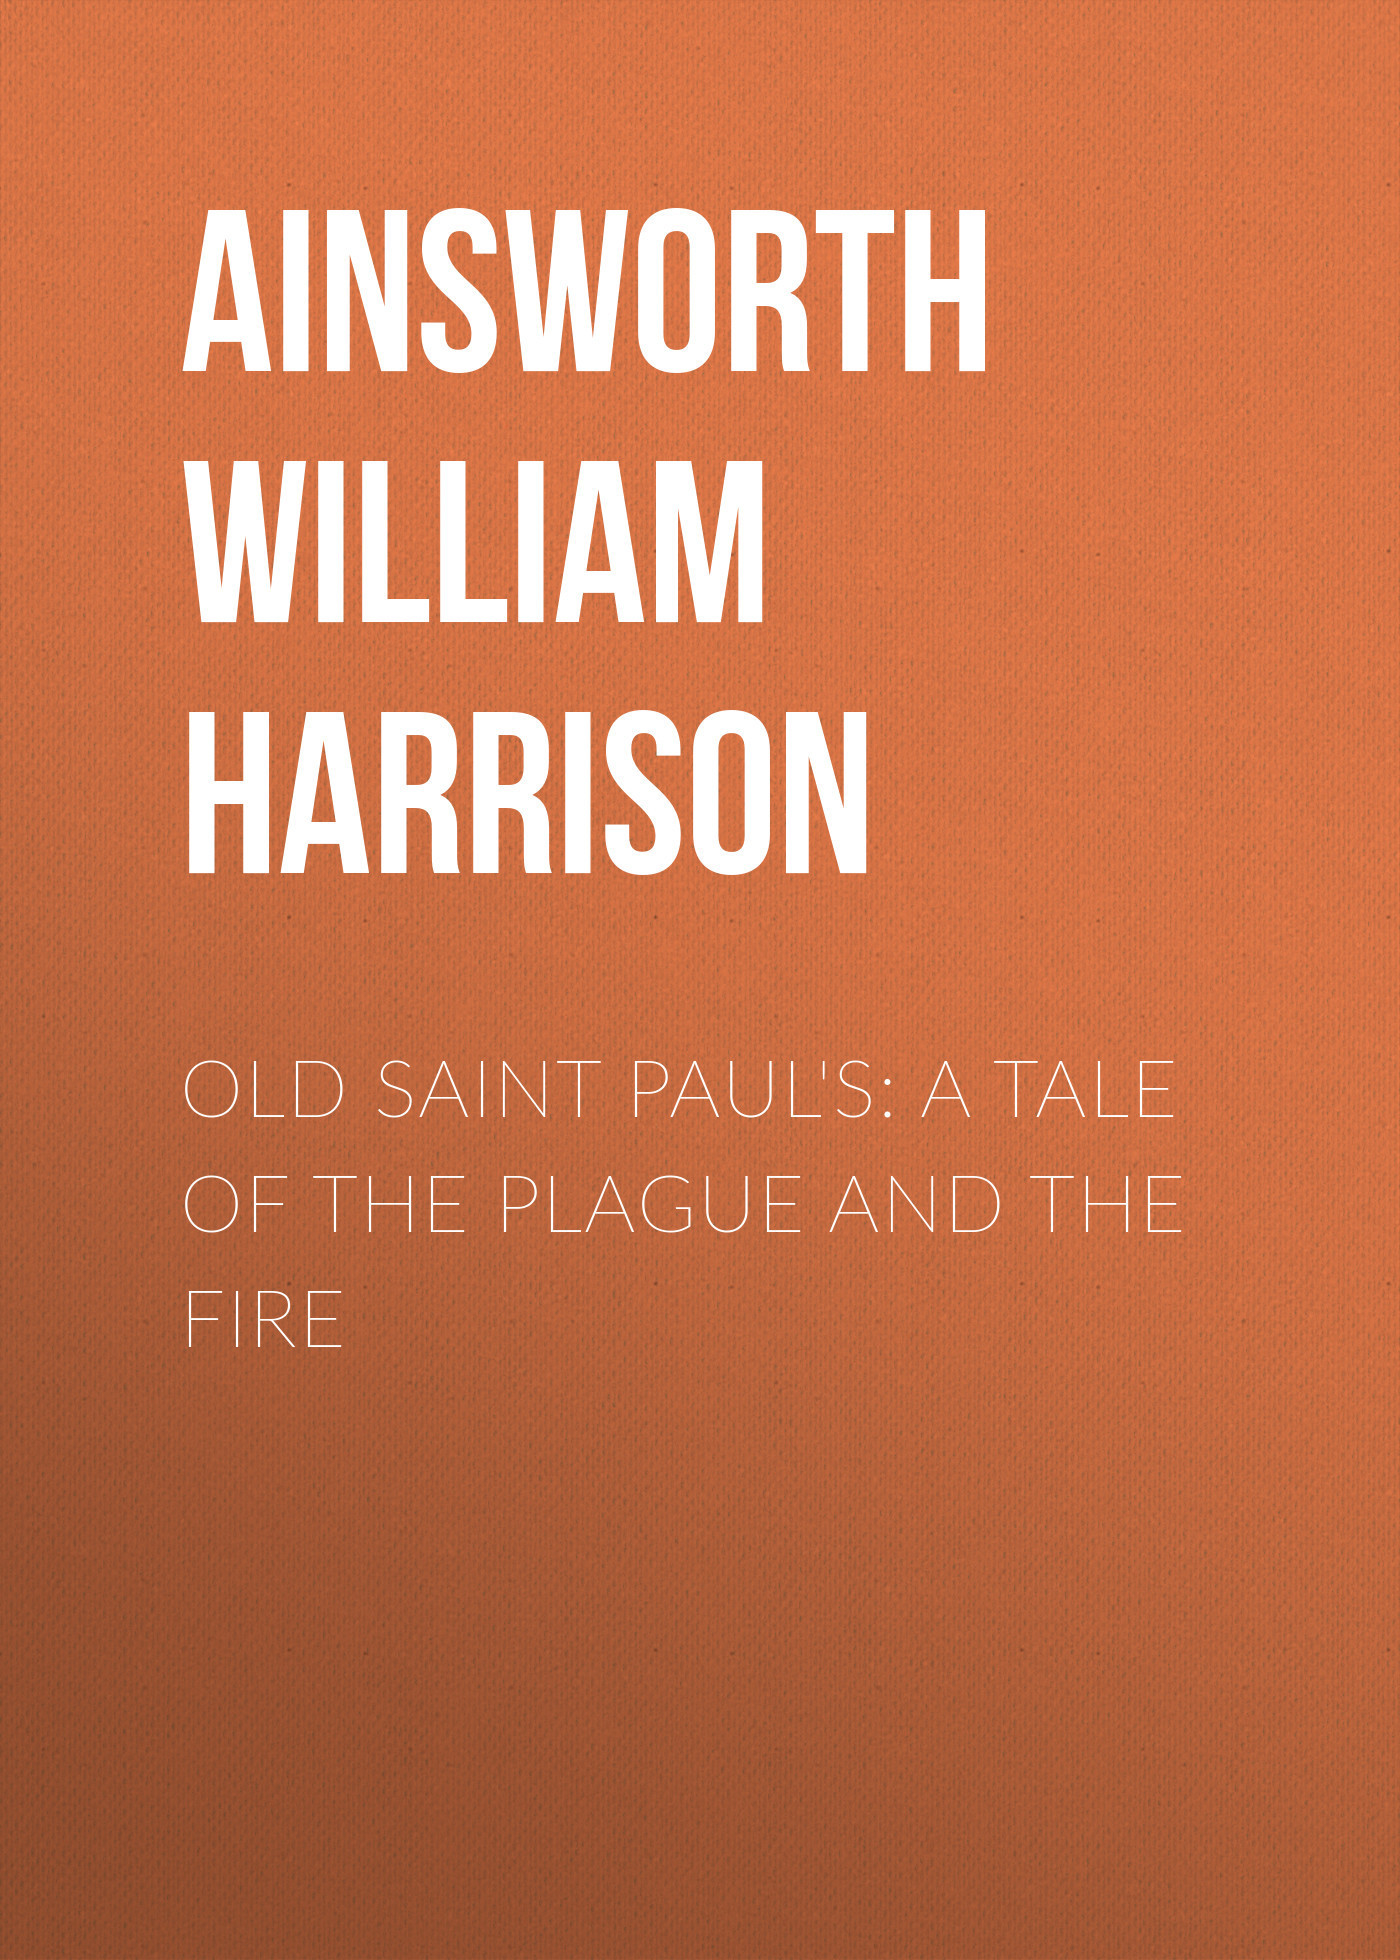 Скачать Old Saint Paul's: A Tale of the Plague and the Fire - Ainsworth William Harrison